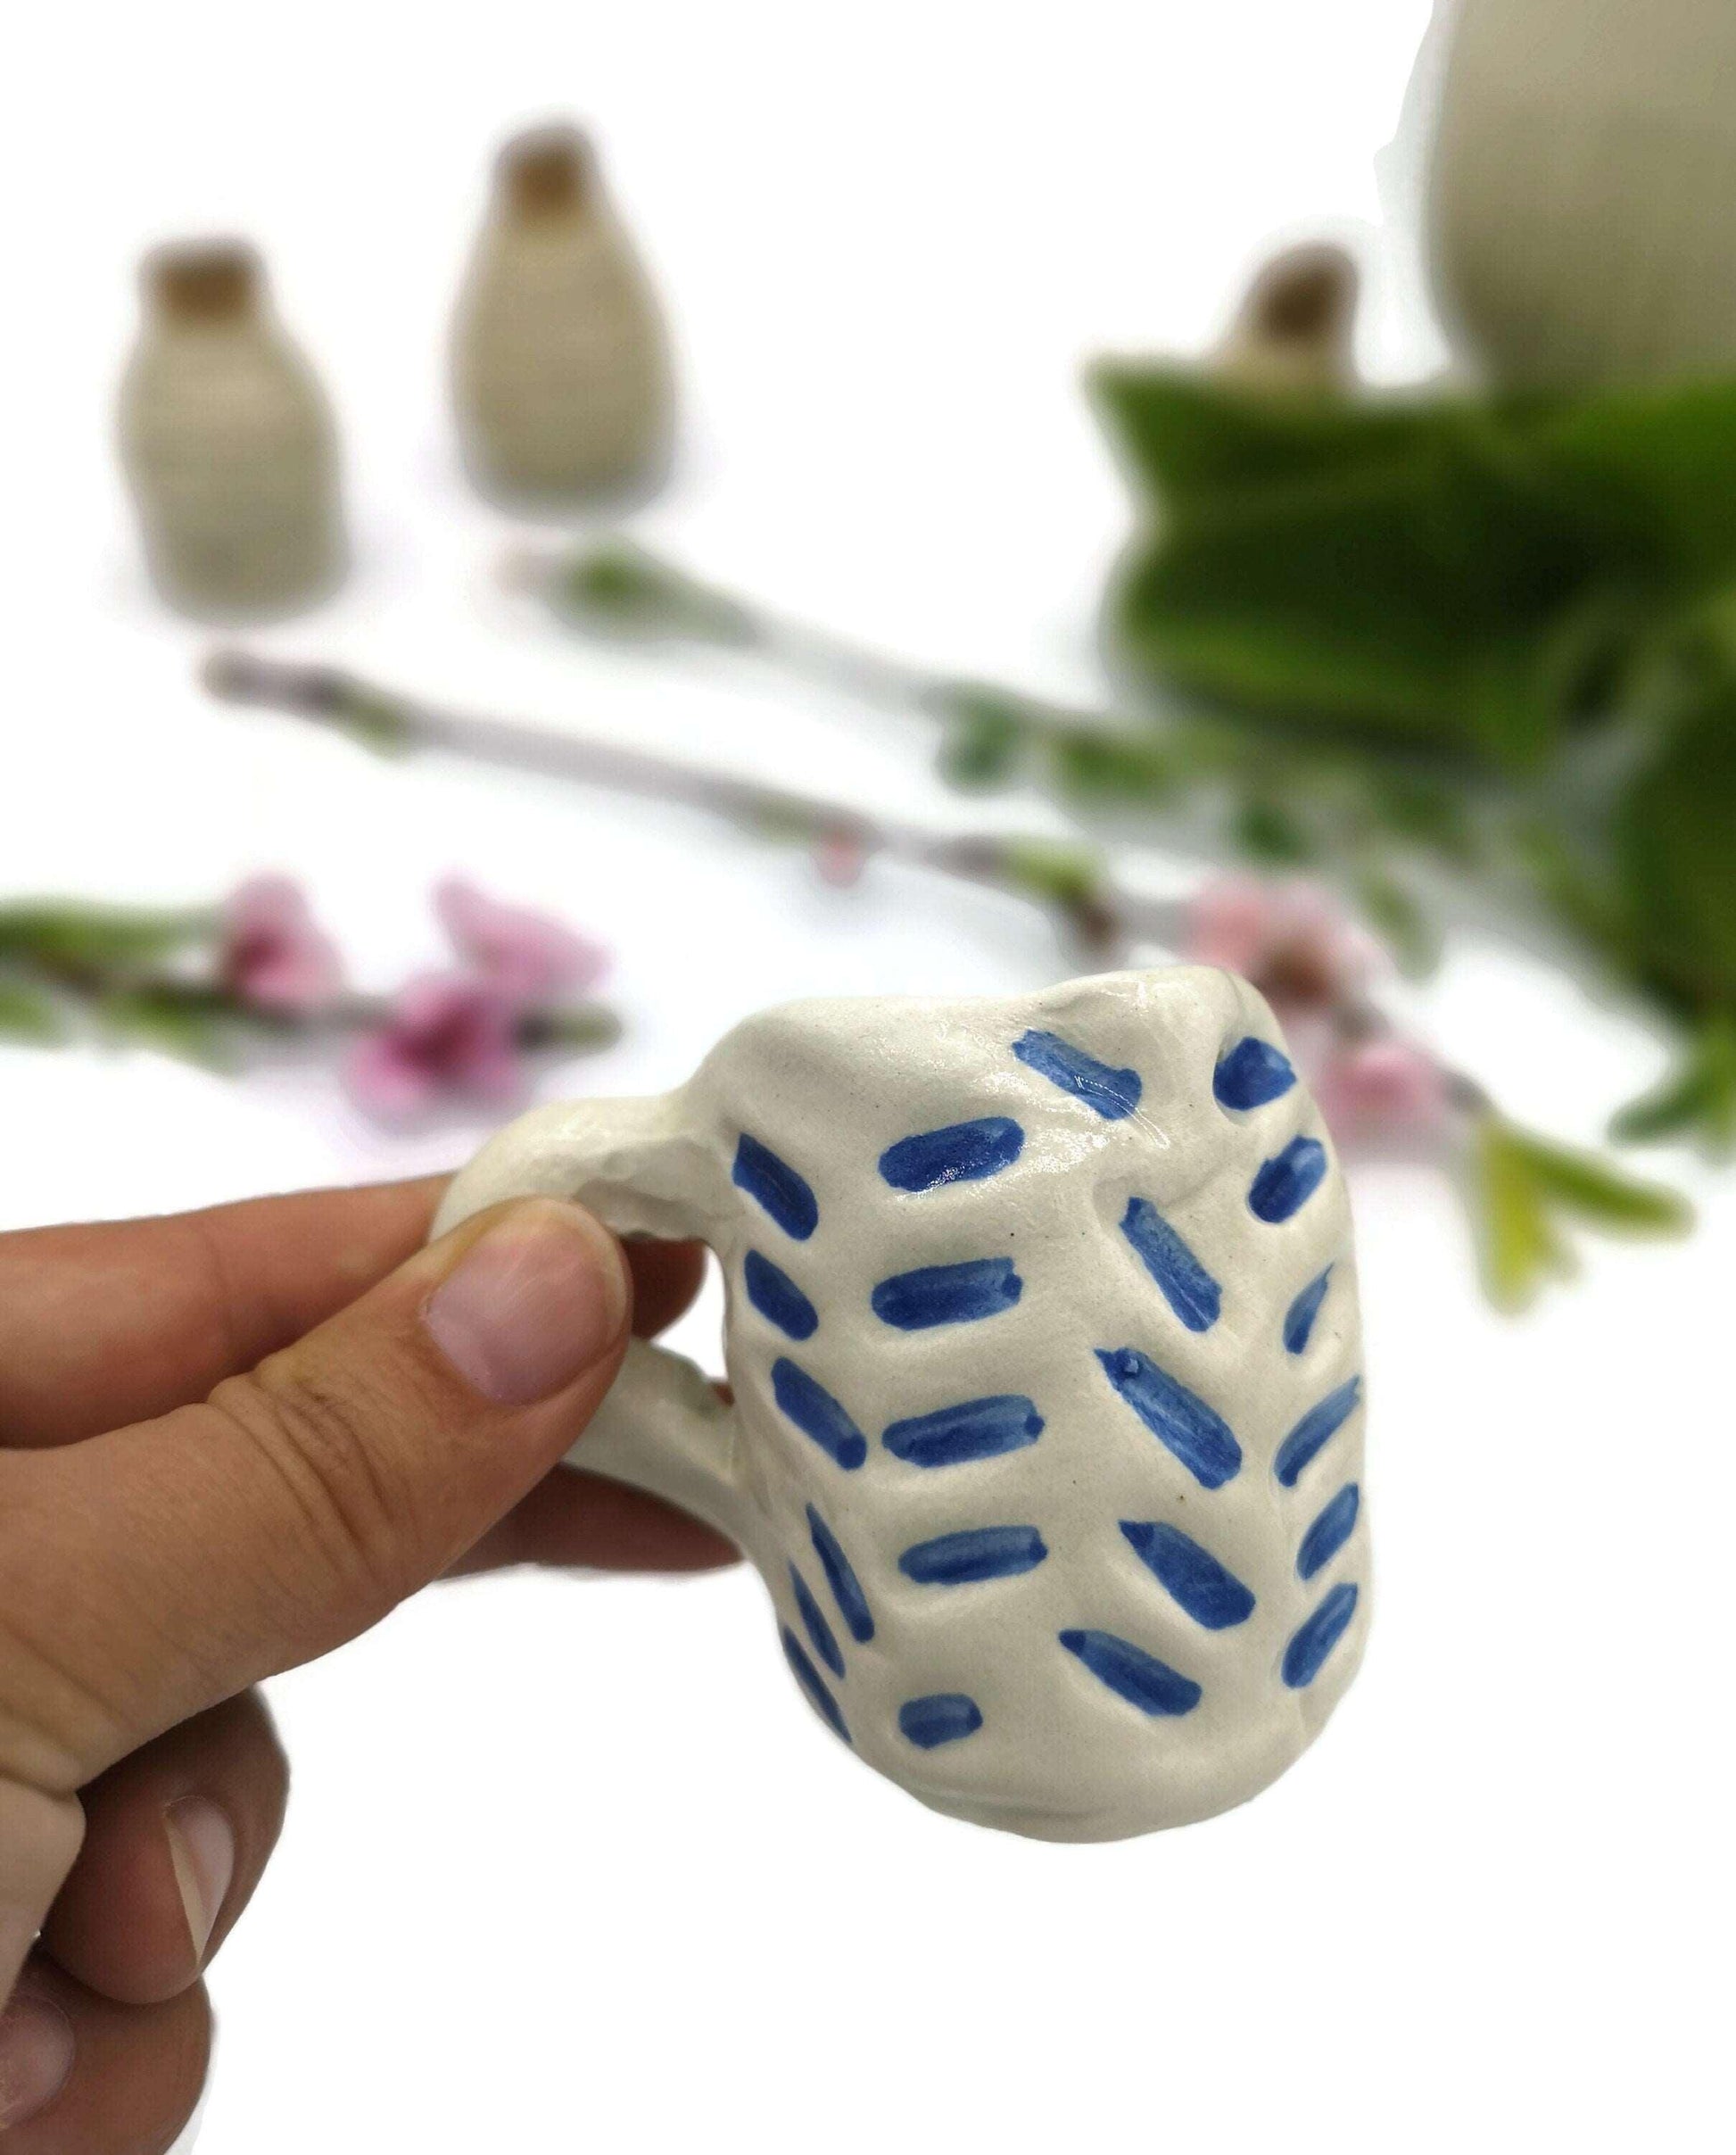 1Pc Handmade Ceramic Espresso Cup White and Blue, Funny Shot Glass Fathers Day Gift From Daughter, Mug Birthday Step Dad Gift Best Sellers